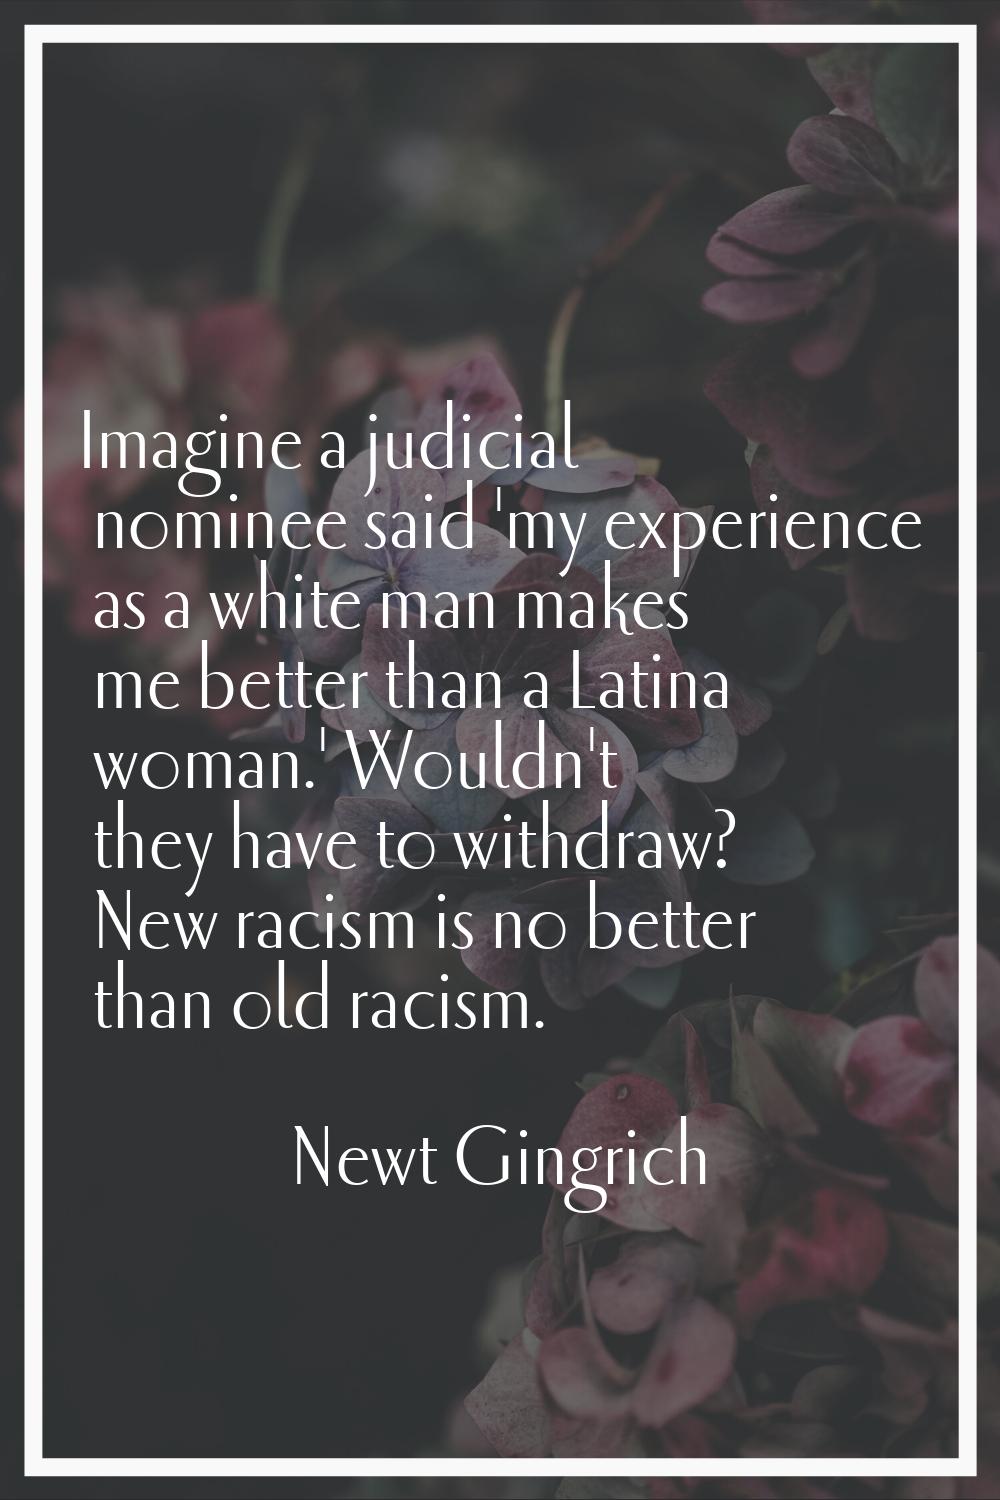 Imagine a judicial nominee said 'my experience as a white man makes me better than a Latina woman.'